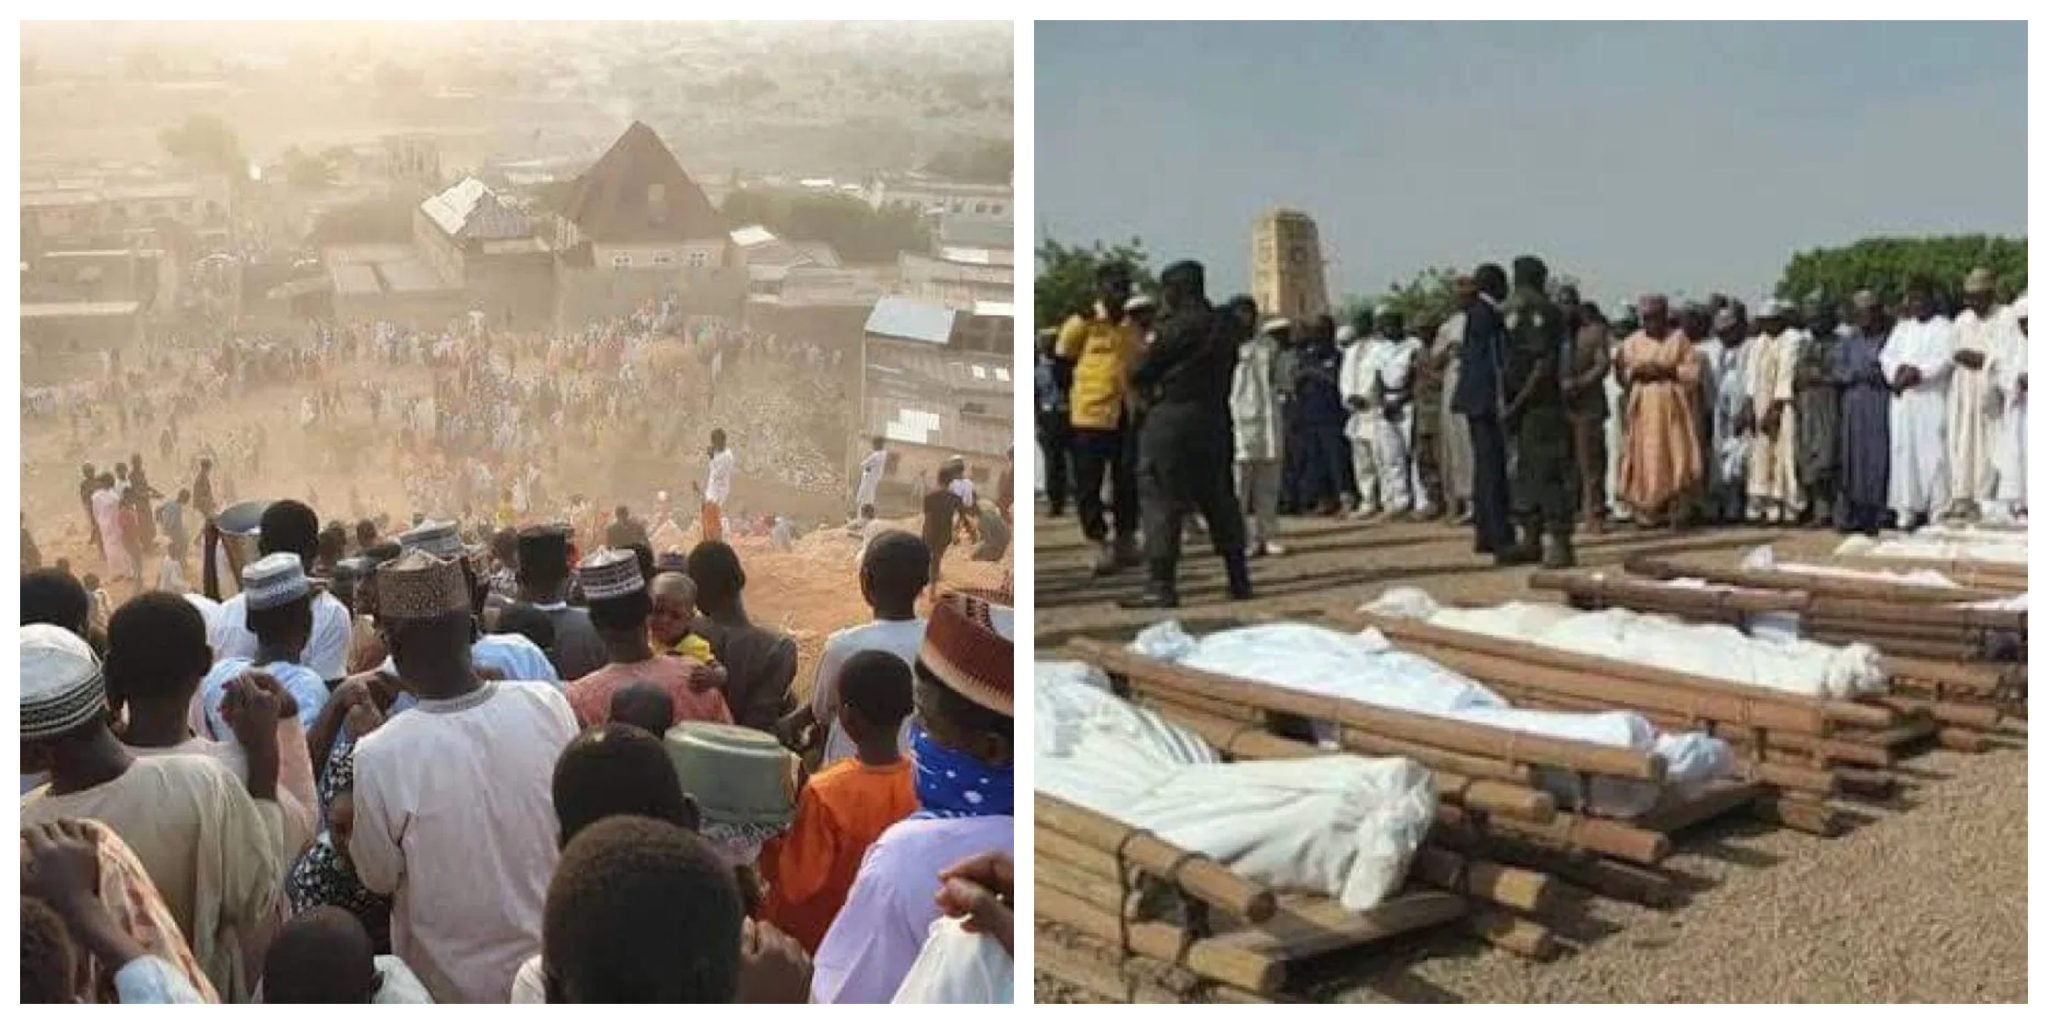 Kano To Rely On ‘Verbal’ Autopsy For Mysterious Deaths